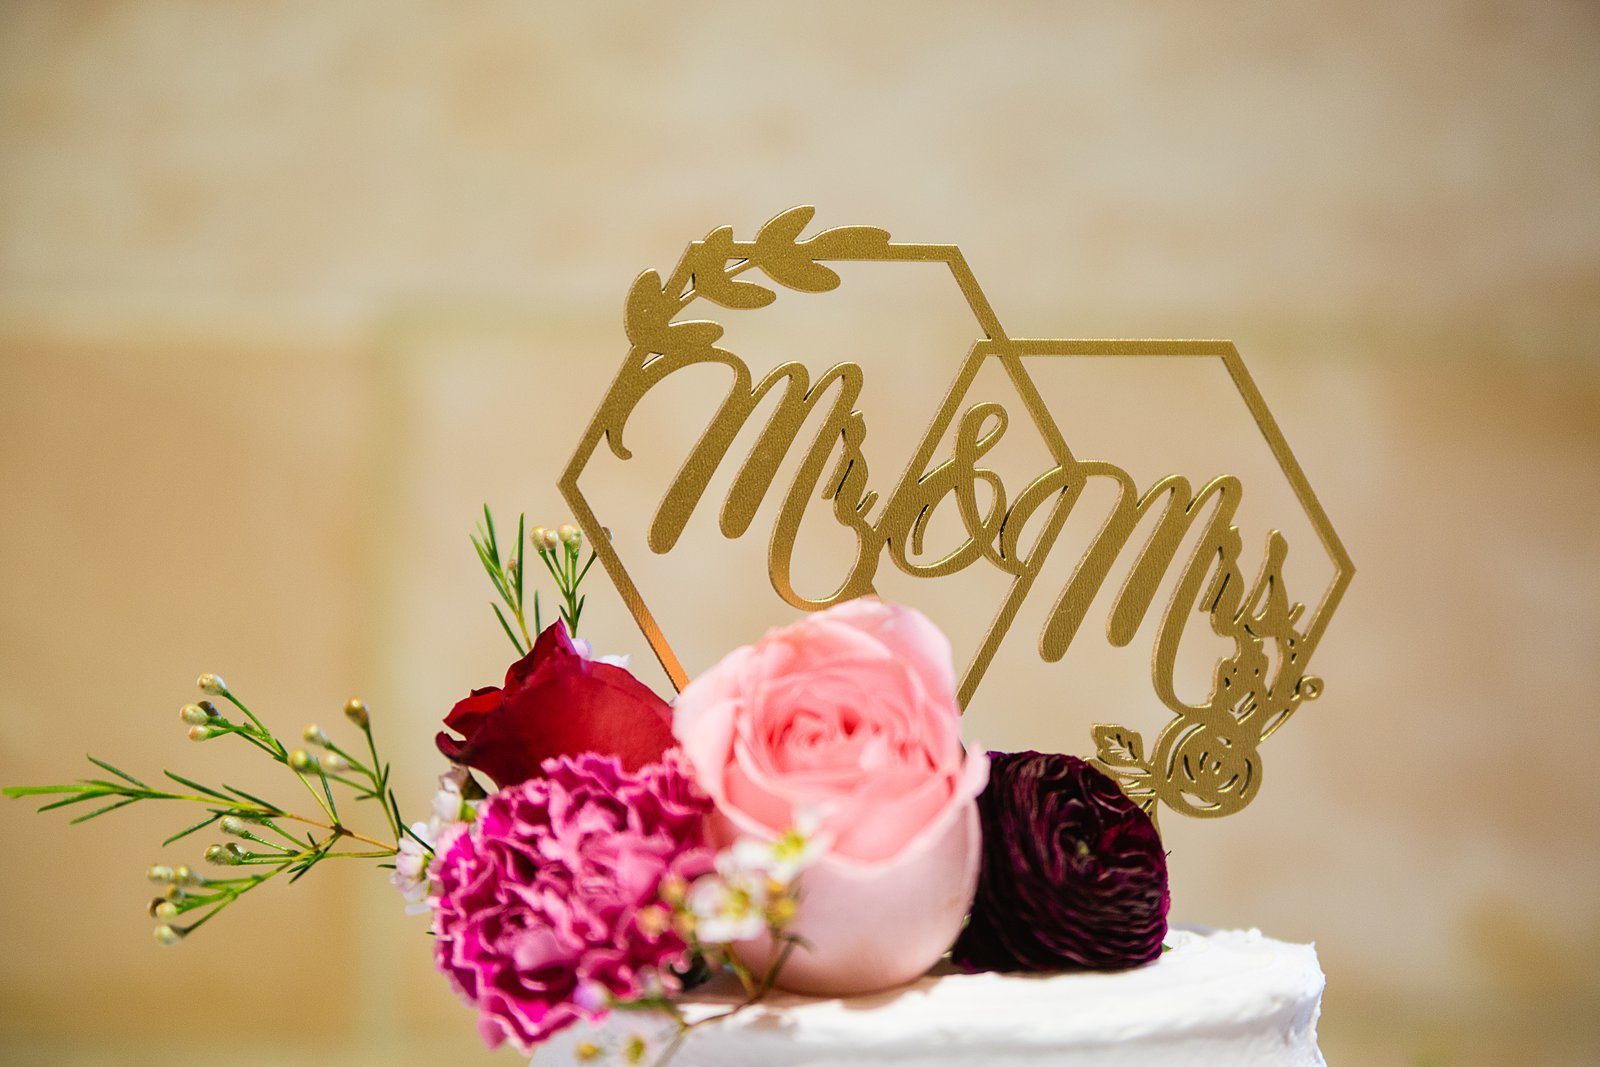 Simple wedding cake with pink and burgundy florals by Arizona wedding photographer PMA Photography.